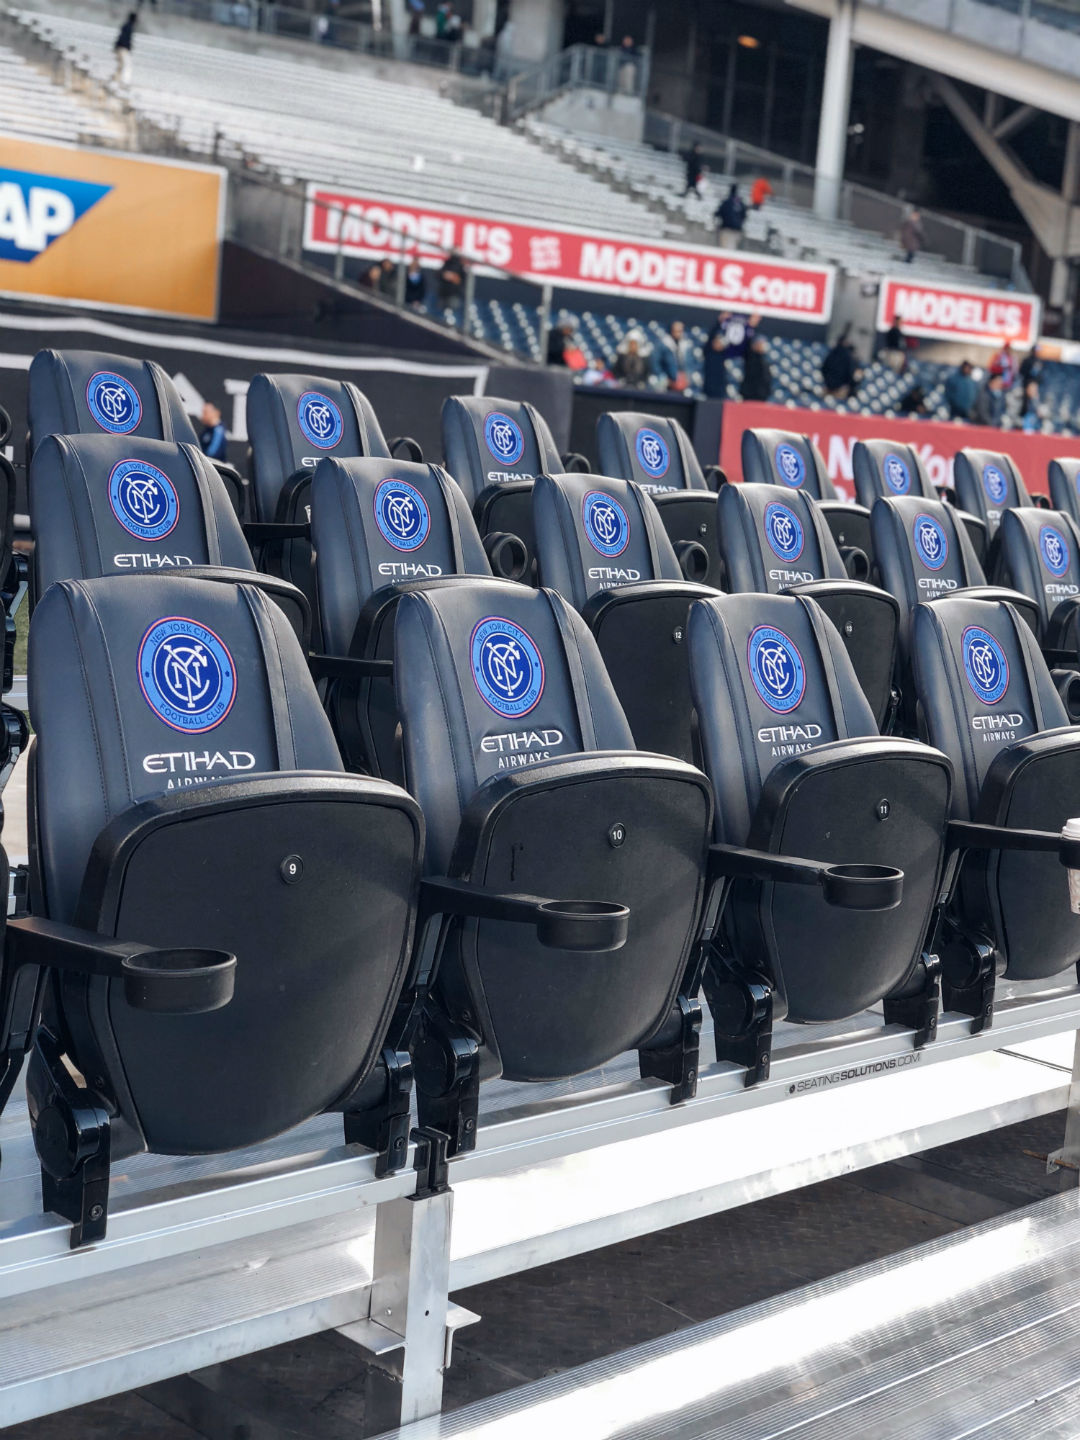 Blogger Sarah Lindner of The house of sequins Tips For Attending a NYCFC Soccer Game